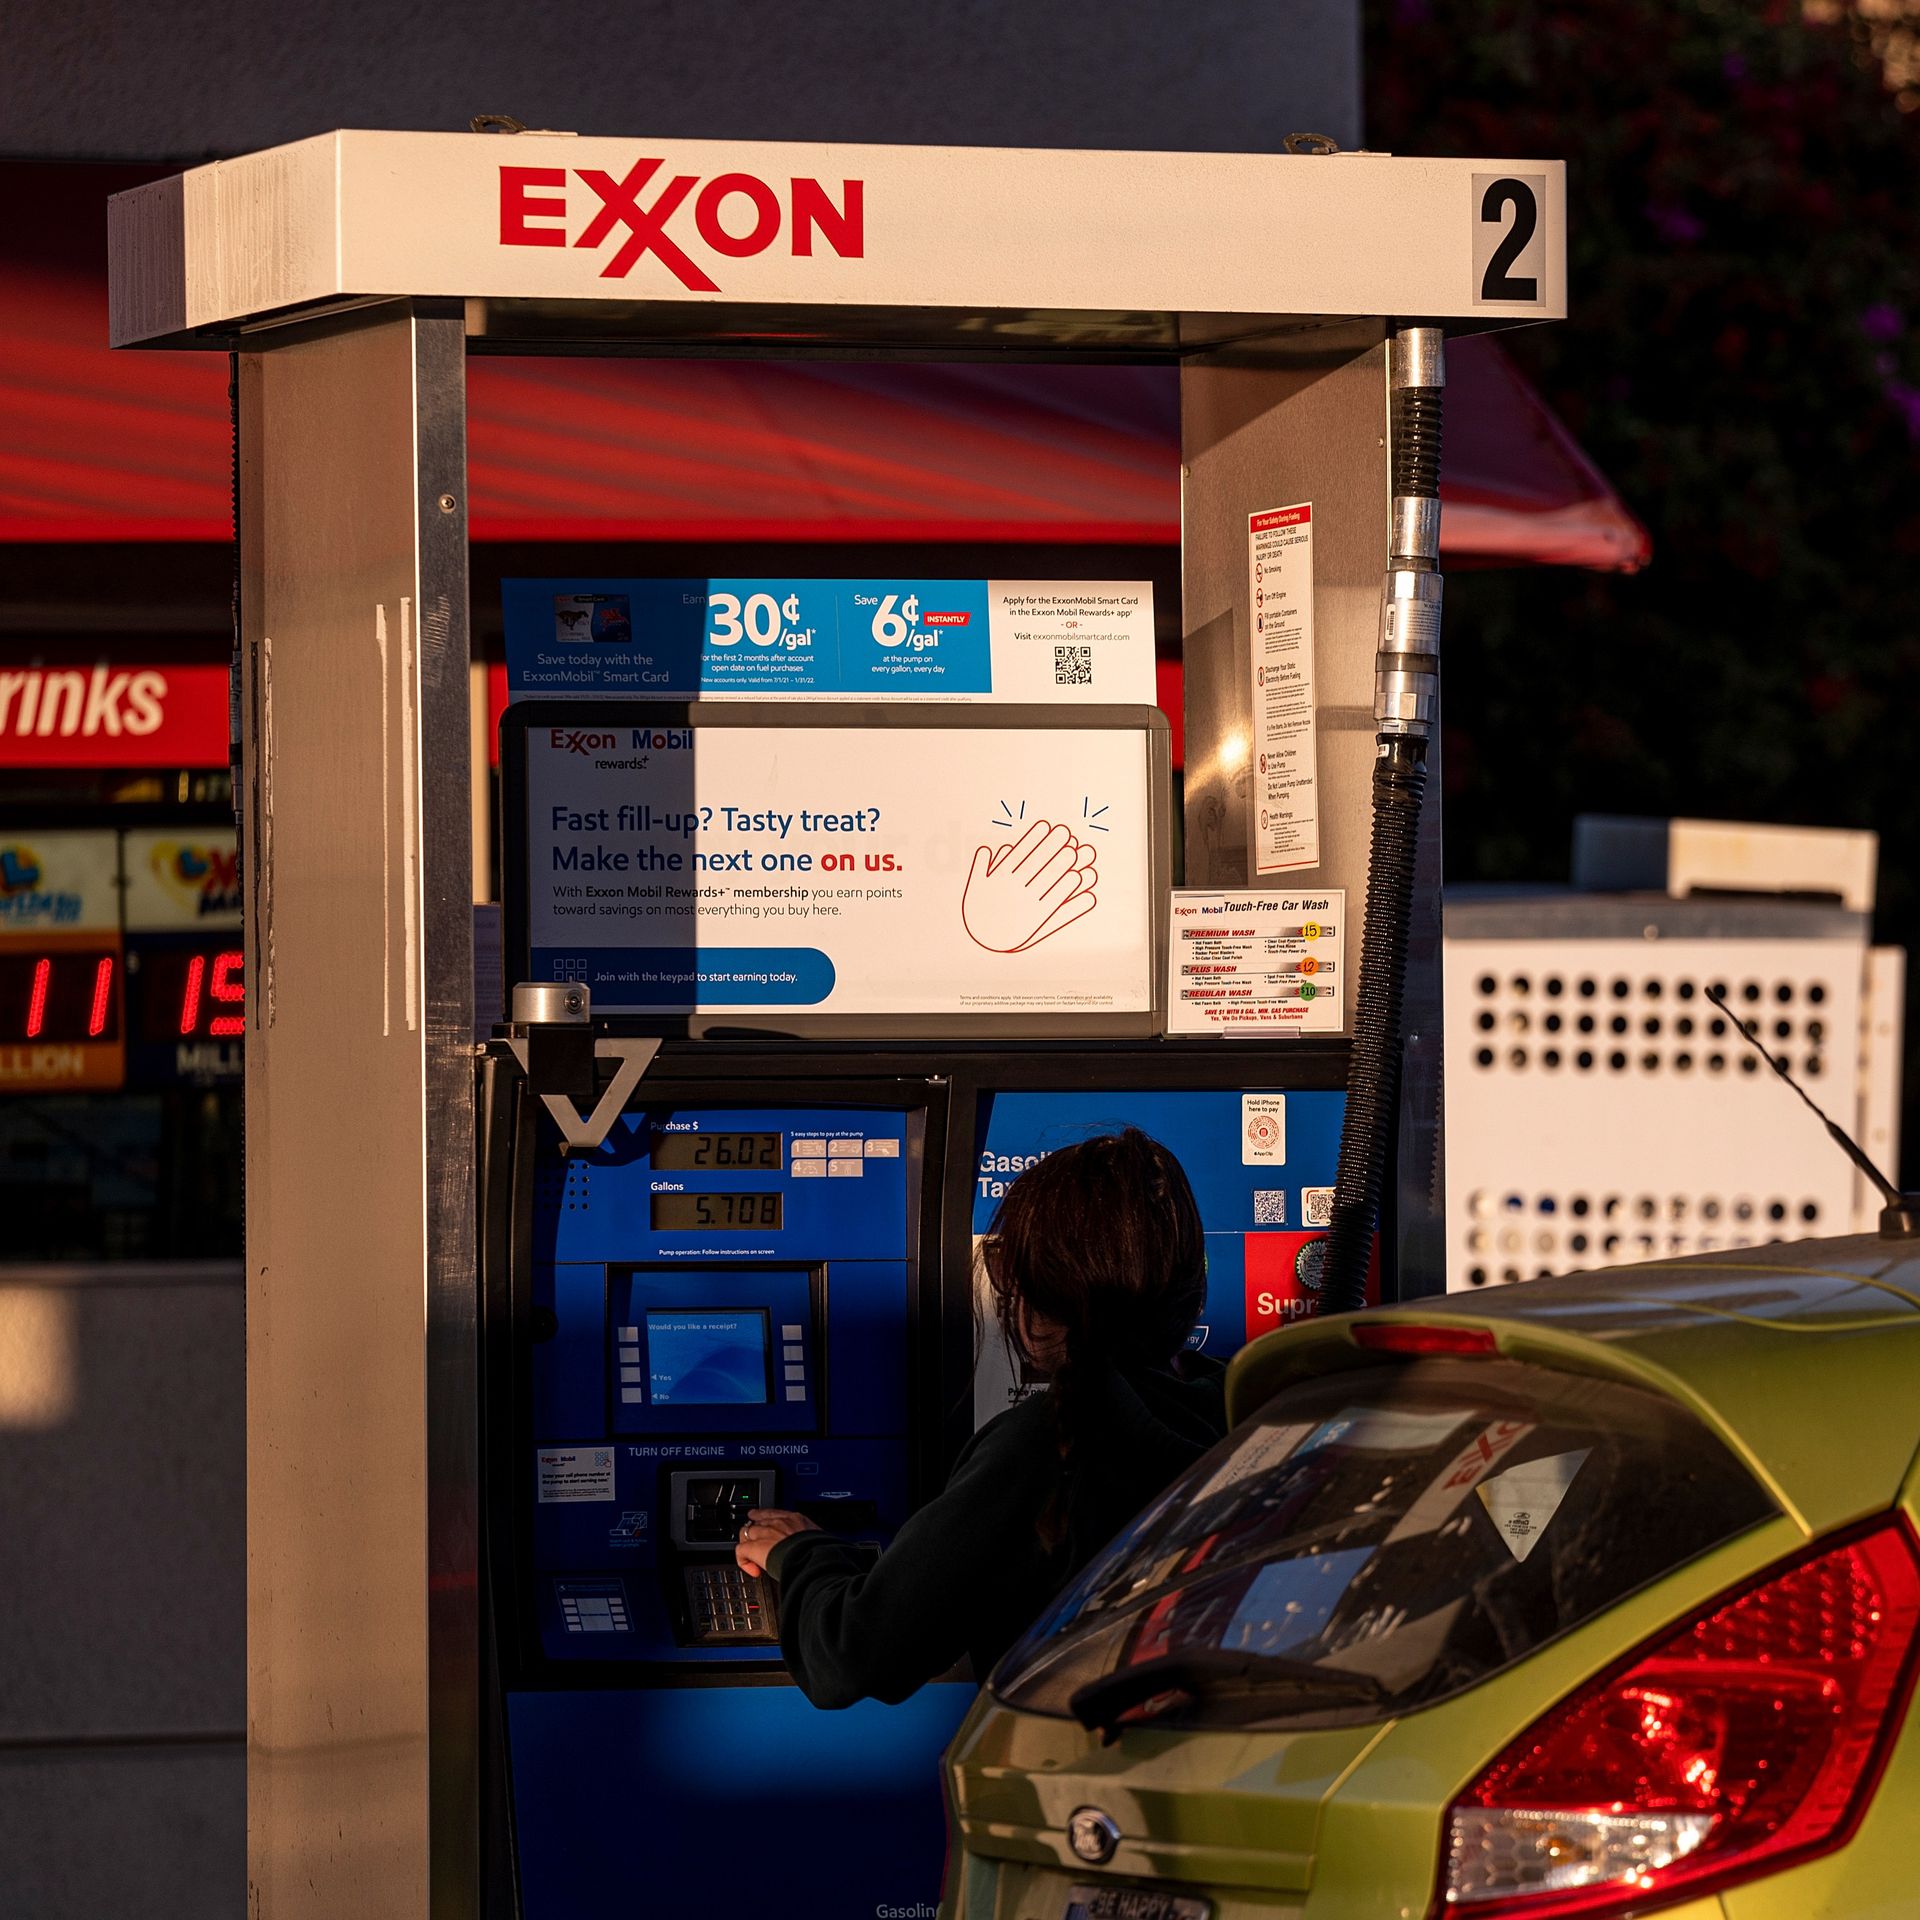 A woman fills up her car with gas at an Exxon gas station.